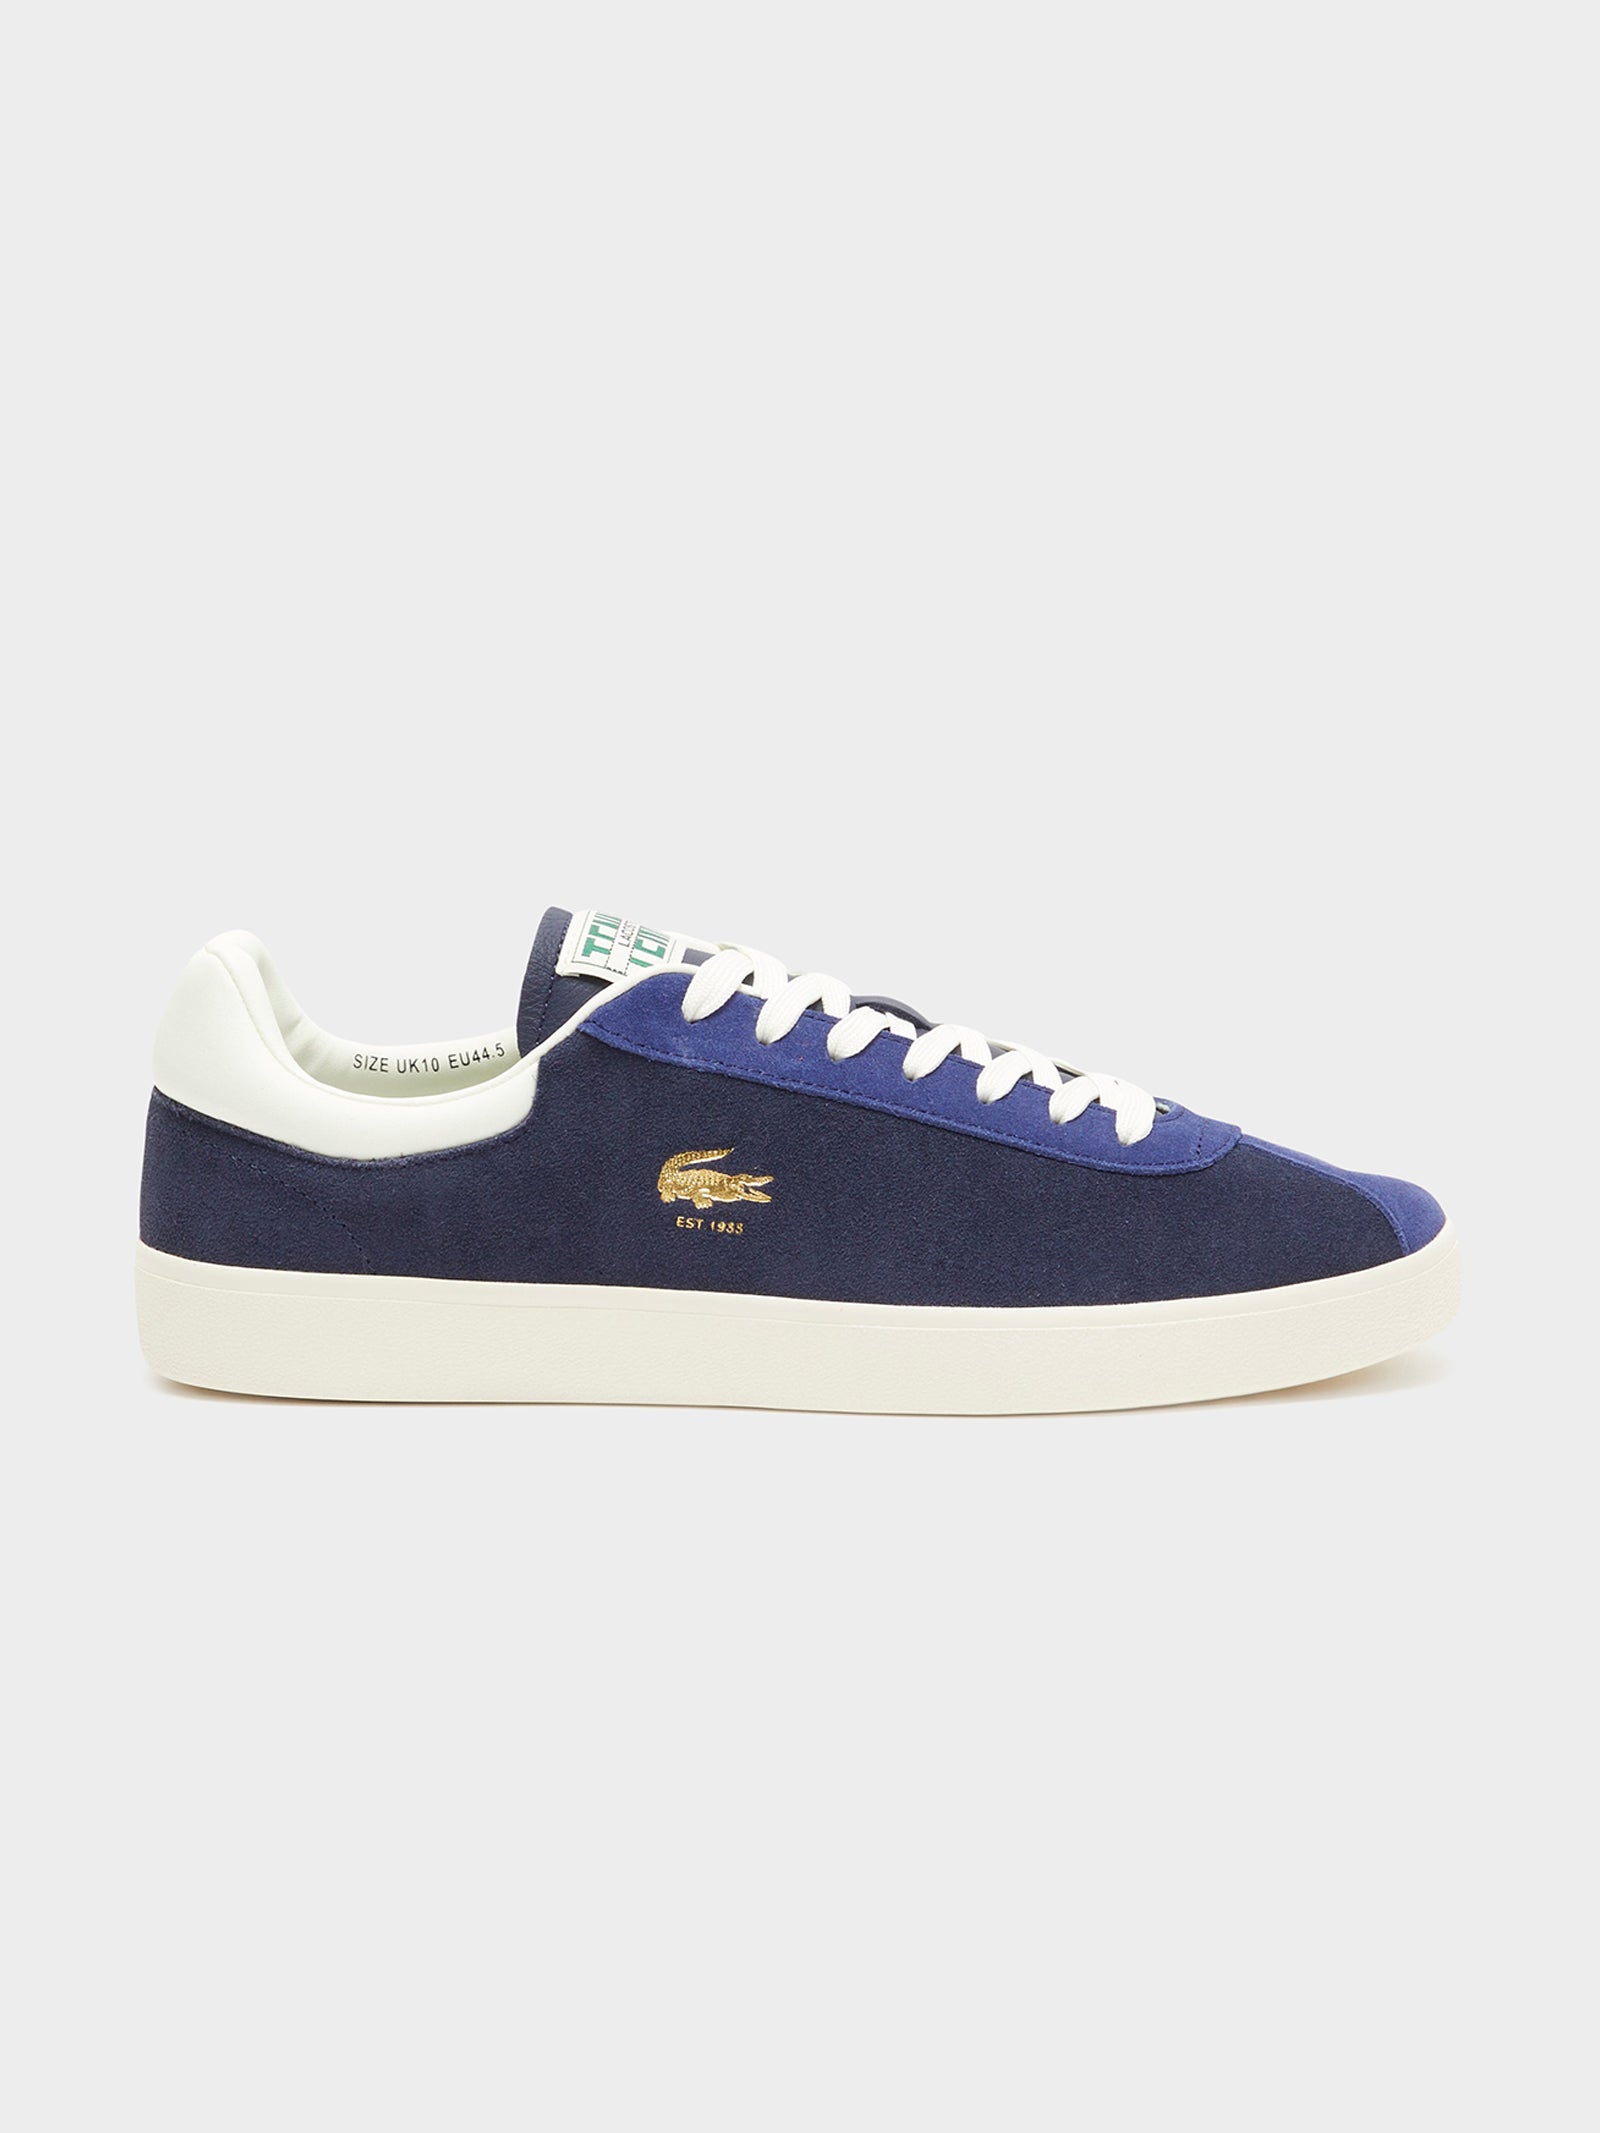 Mens Baseshot Premium Suede Sneakers in Navy & Off White - Glue Store